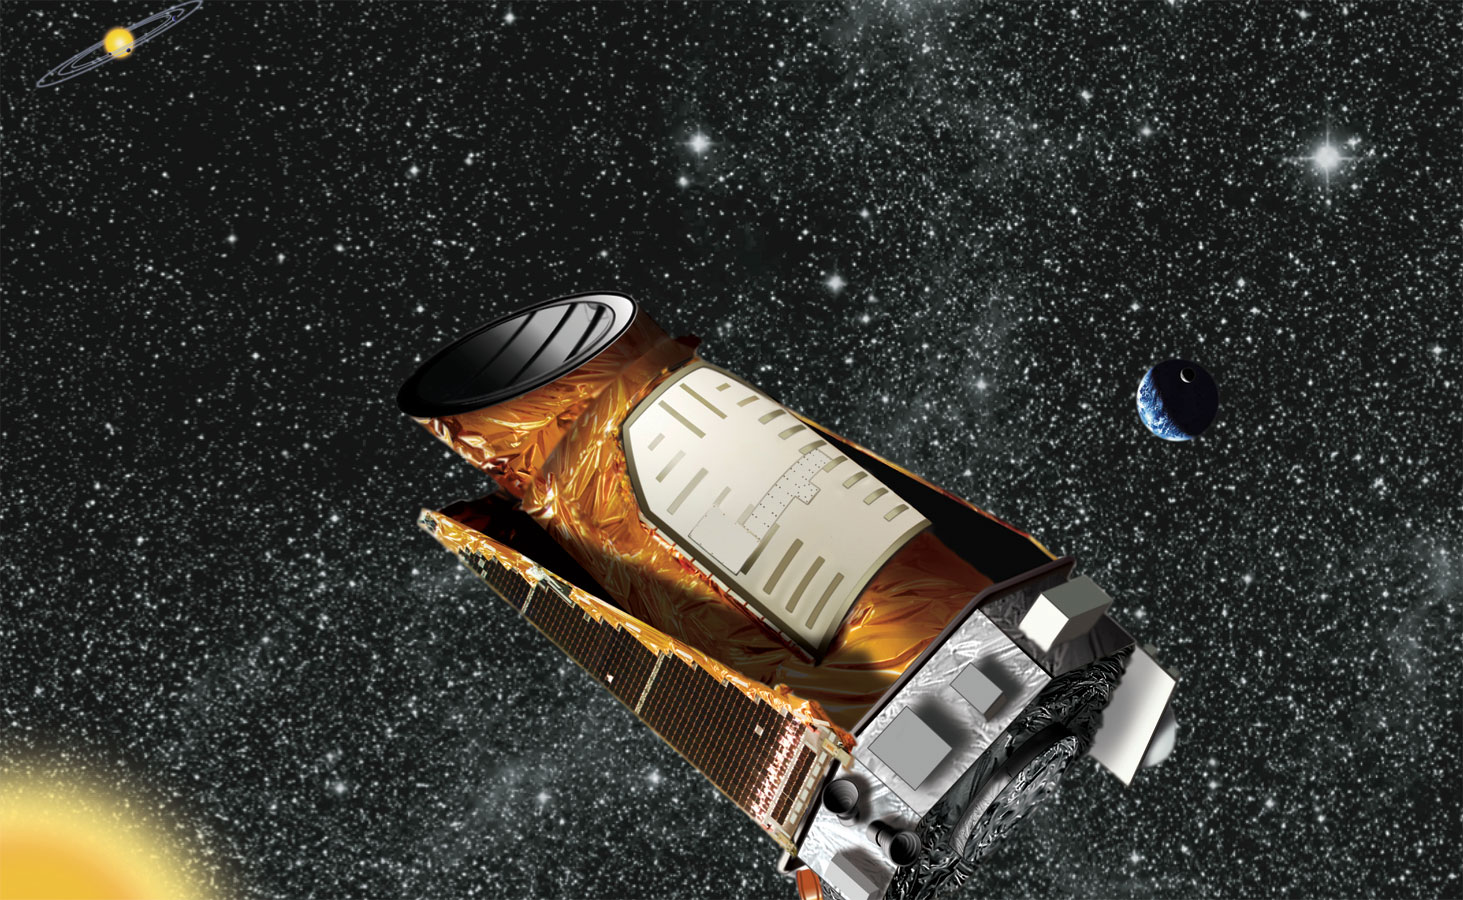 NASA to Reveal Planet-Hunting Kepler Spacecraft's Latest Discoveries Today